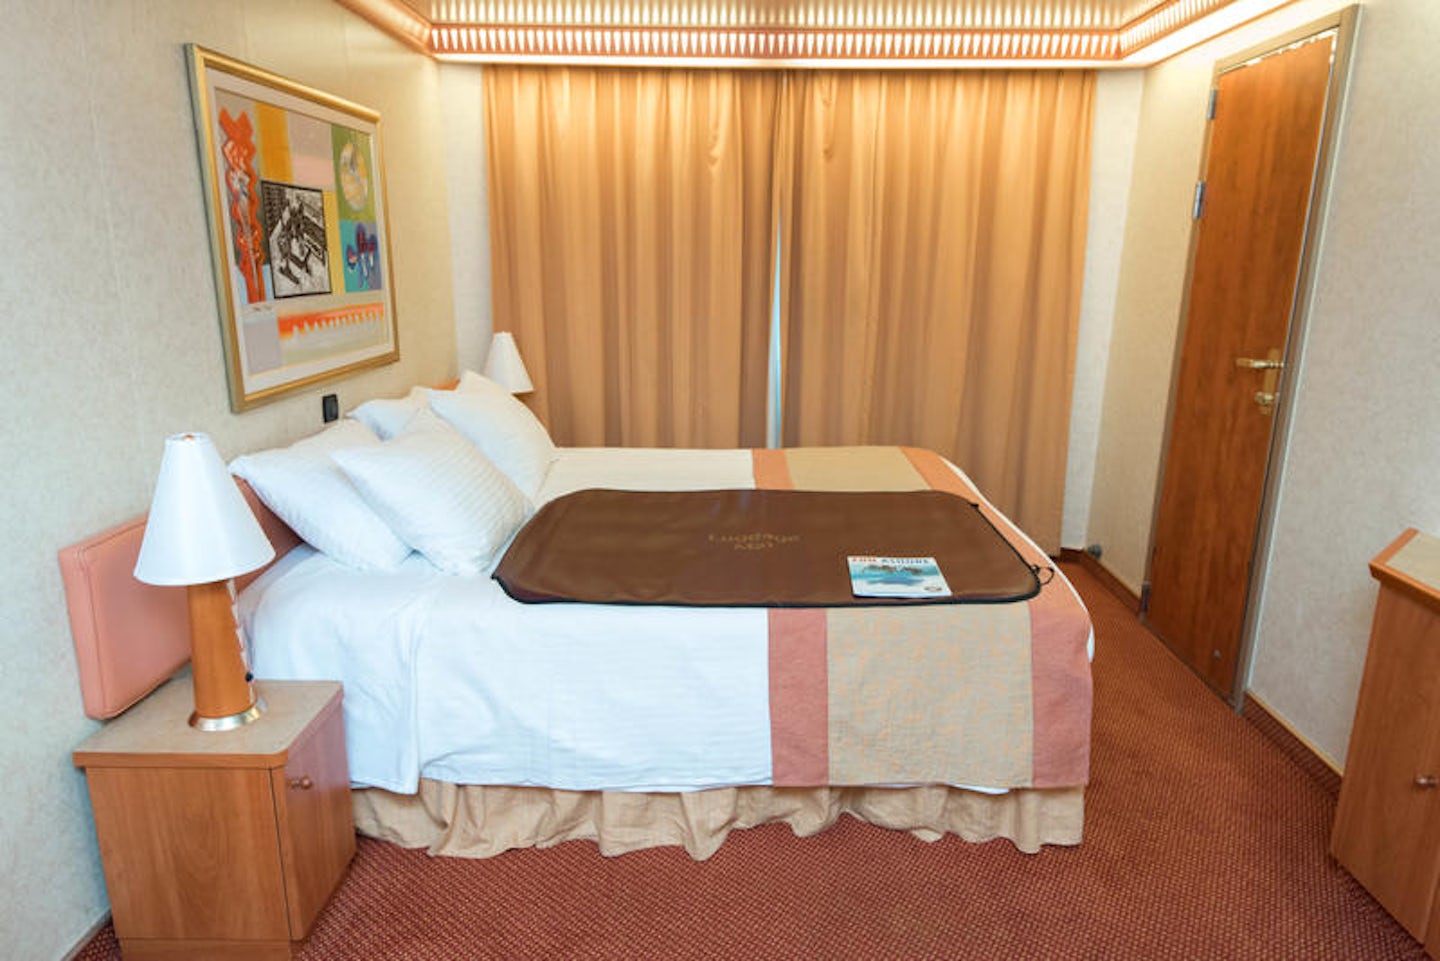 The Cabin on Carnival Liberty